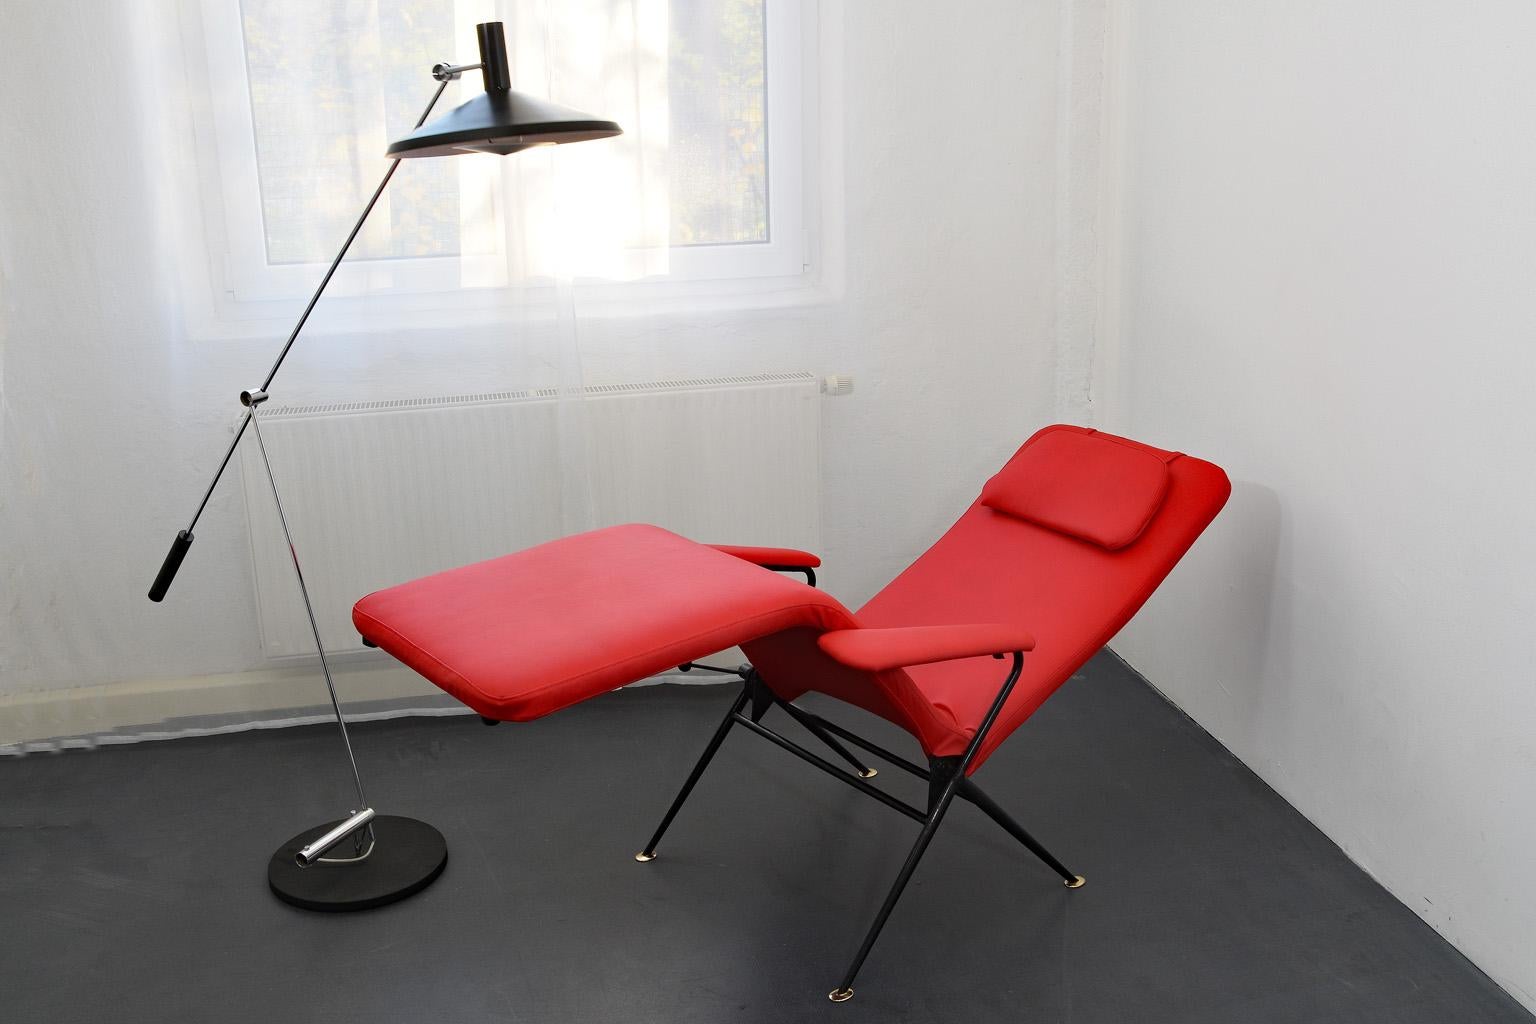 Mid-20th Century Sunlounger / Deckchair in Red, Chaise Lounge / Capri Lounger, Italy, 1950s For Sale